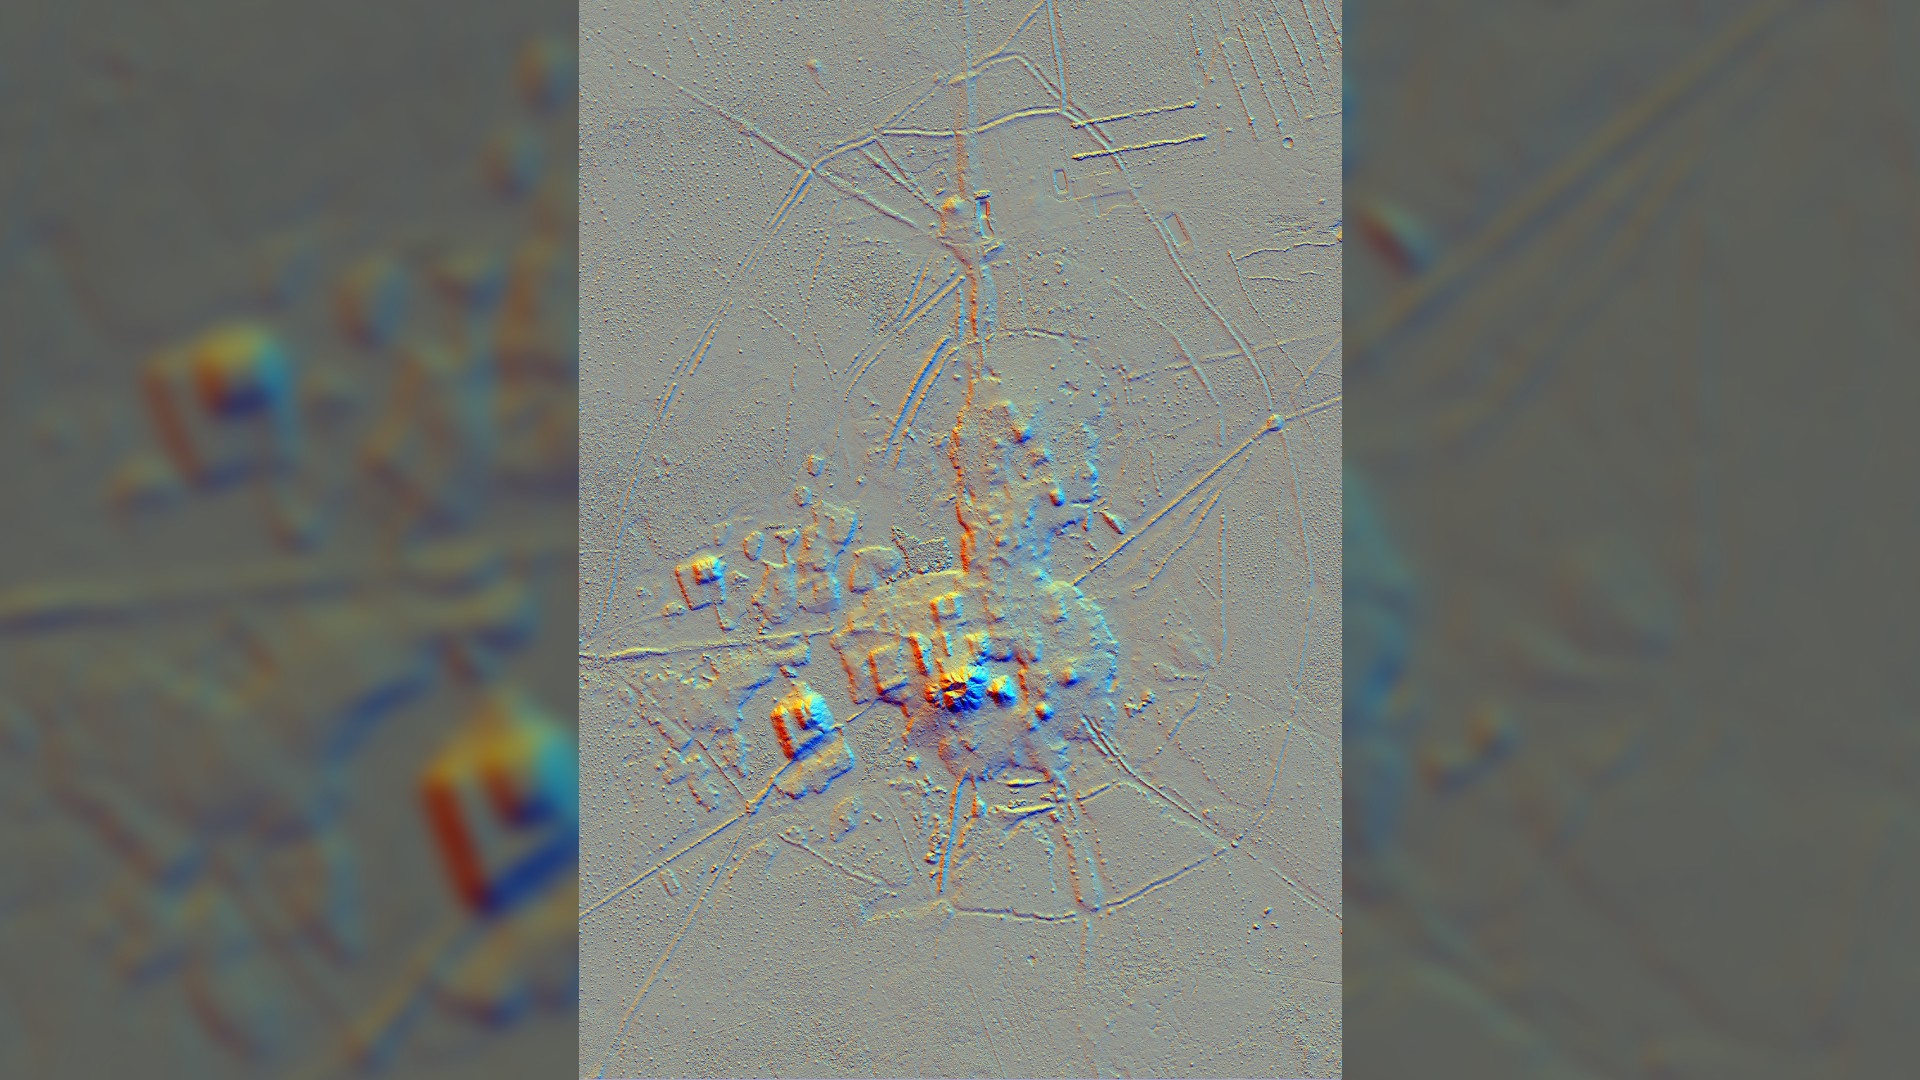 Lidar Image of the Cotoca site (MULTI-HS_D16_H15_RGB image, generated with “Relief Visualization Toolbox”). This is a gray image with lines and shading to show were the ancient structures are.